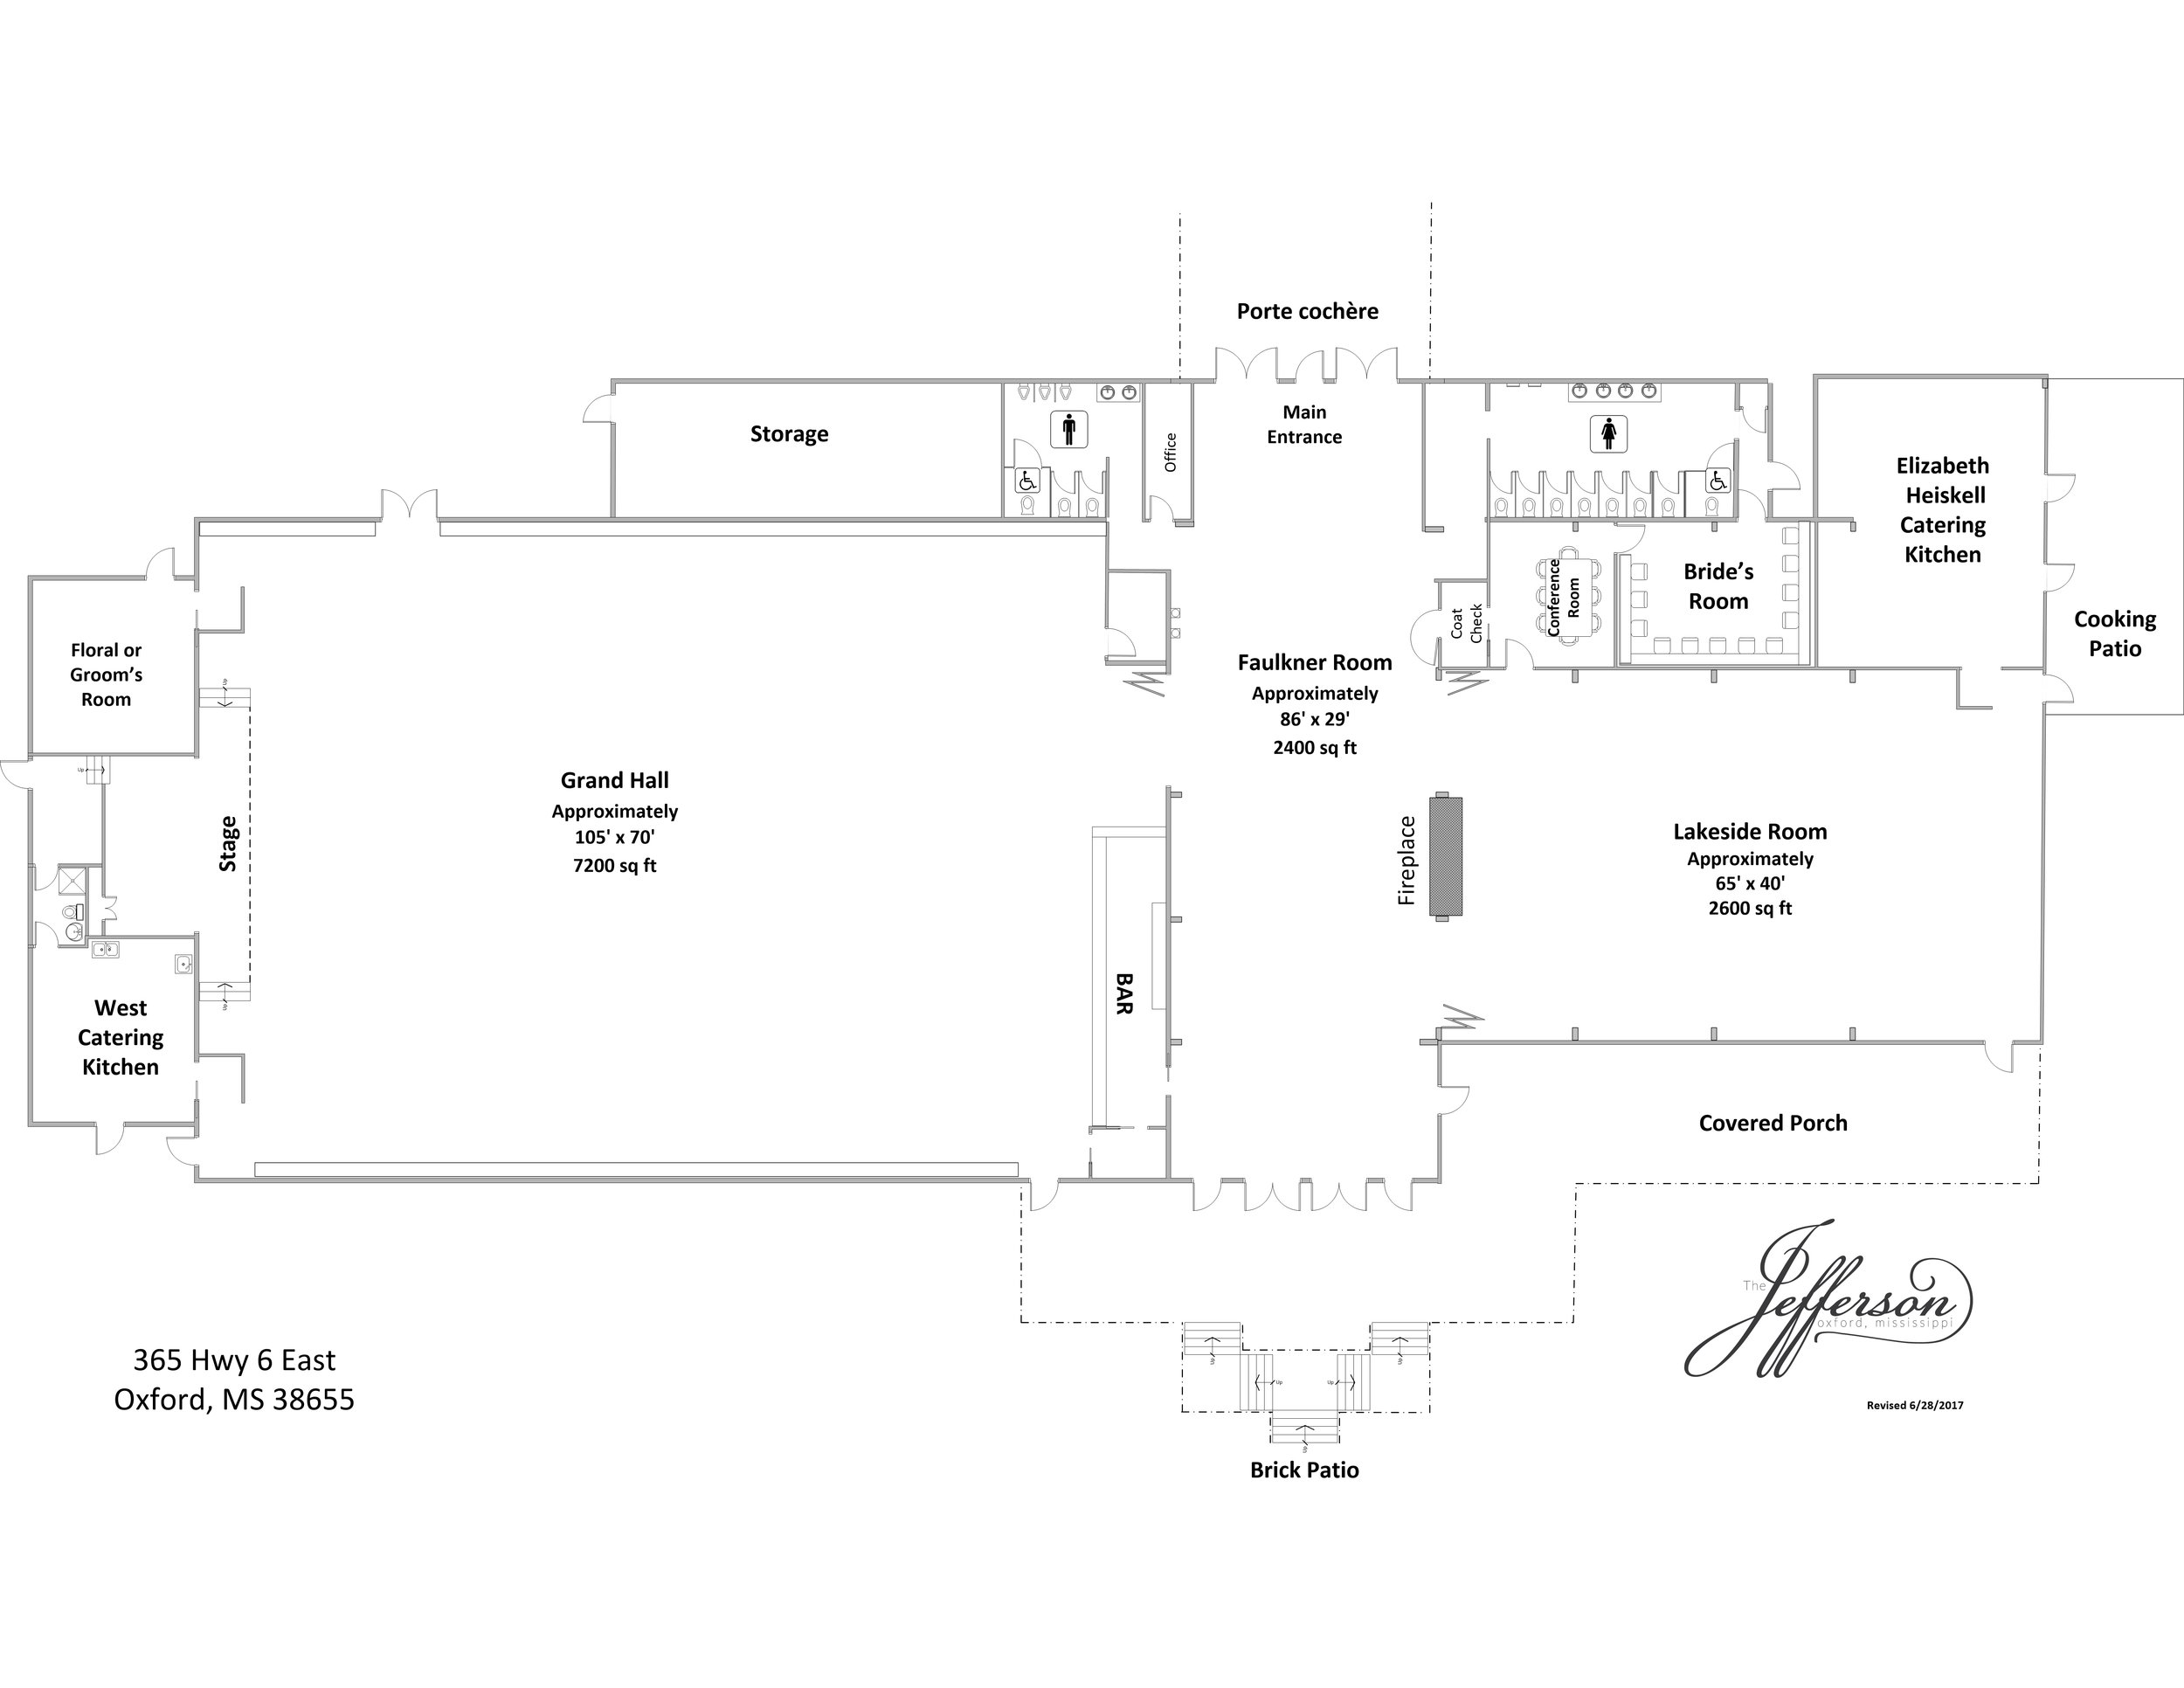 2017 updated building layout.jpg